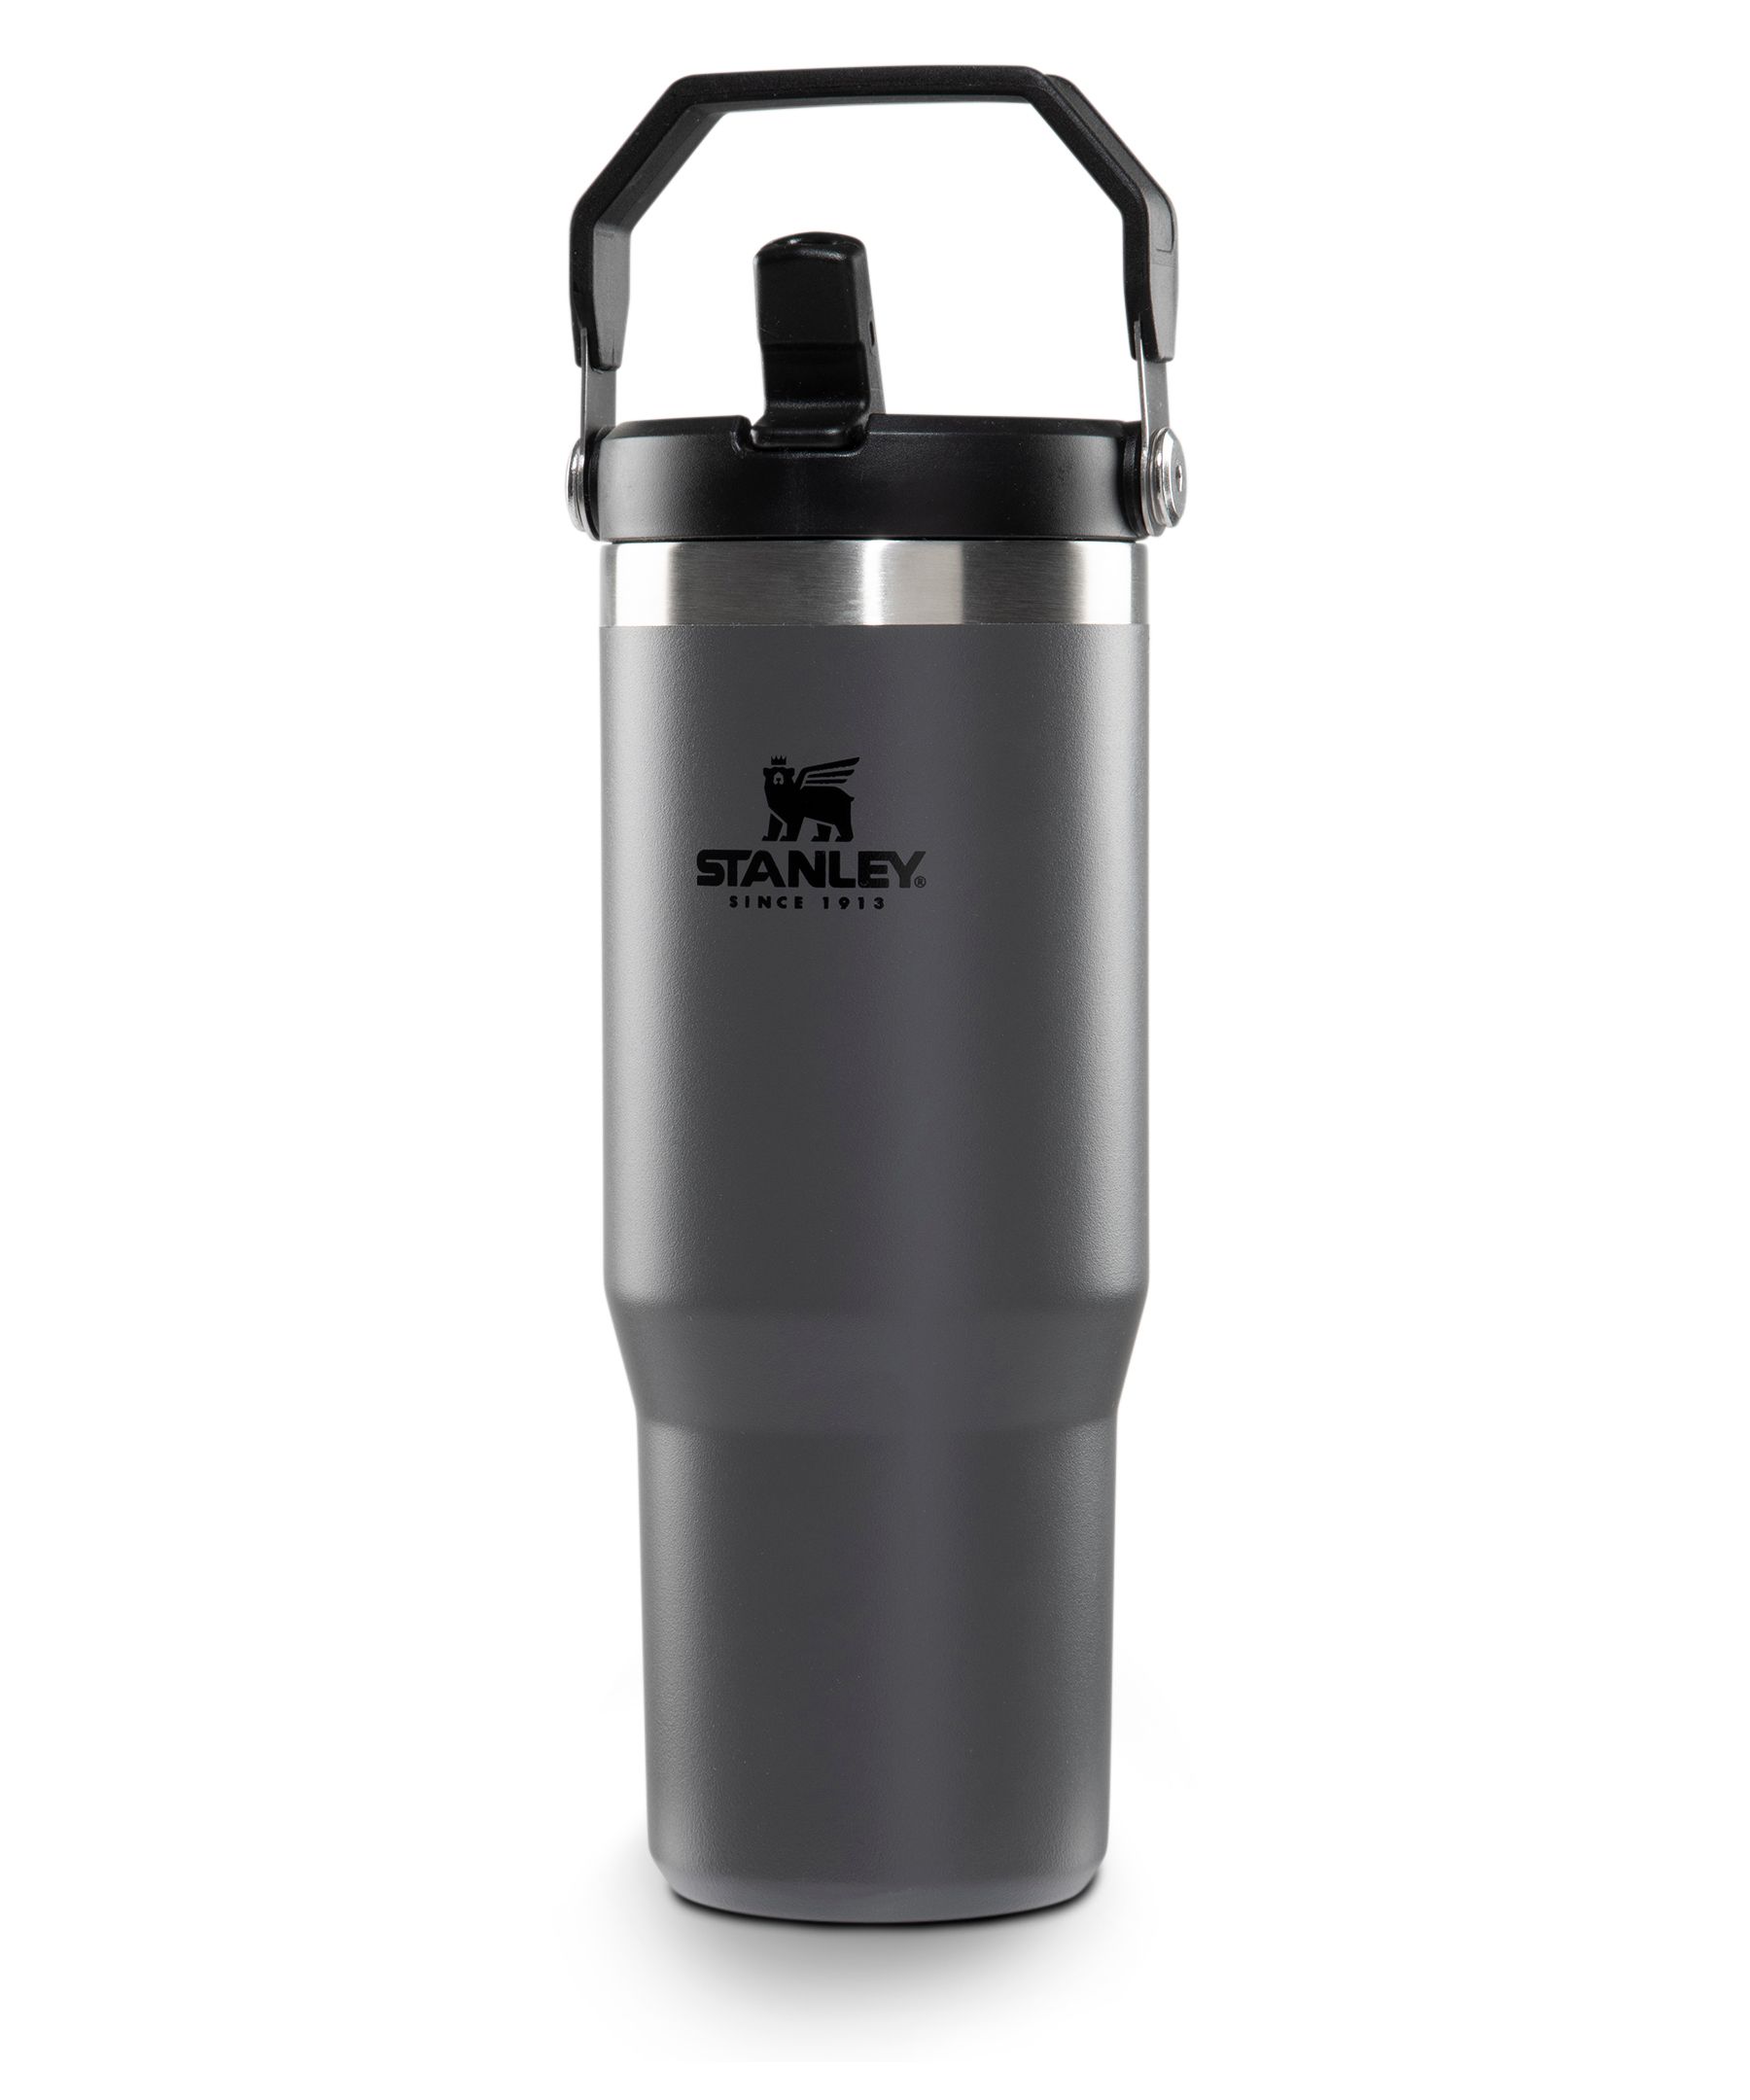 https://media-www.marks.com/product/marks-work-wearhouse/industrial-world/mens-accessories/410036806338/stanley-iceflow-30-oz-flip-straw-tumbler-s23-f9eb99aa-32e0-43a1-b52f-ad7853131641-jpgrendition.jpg